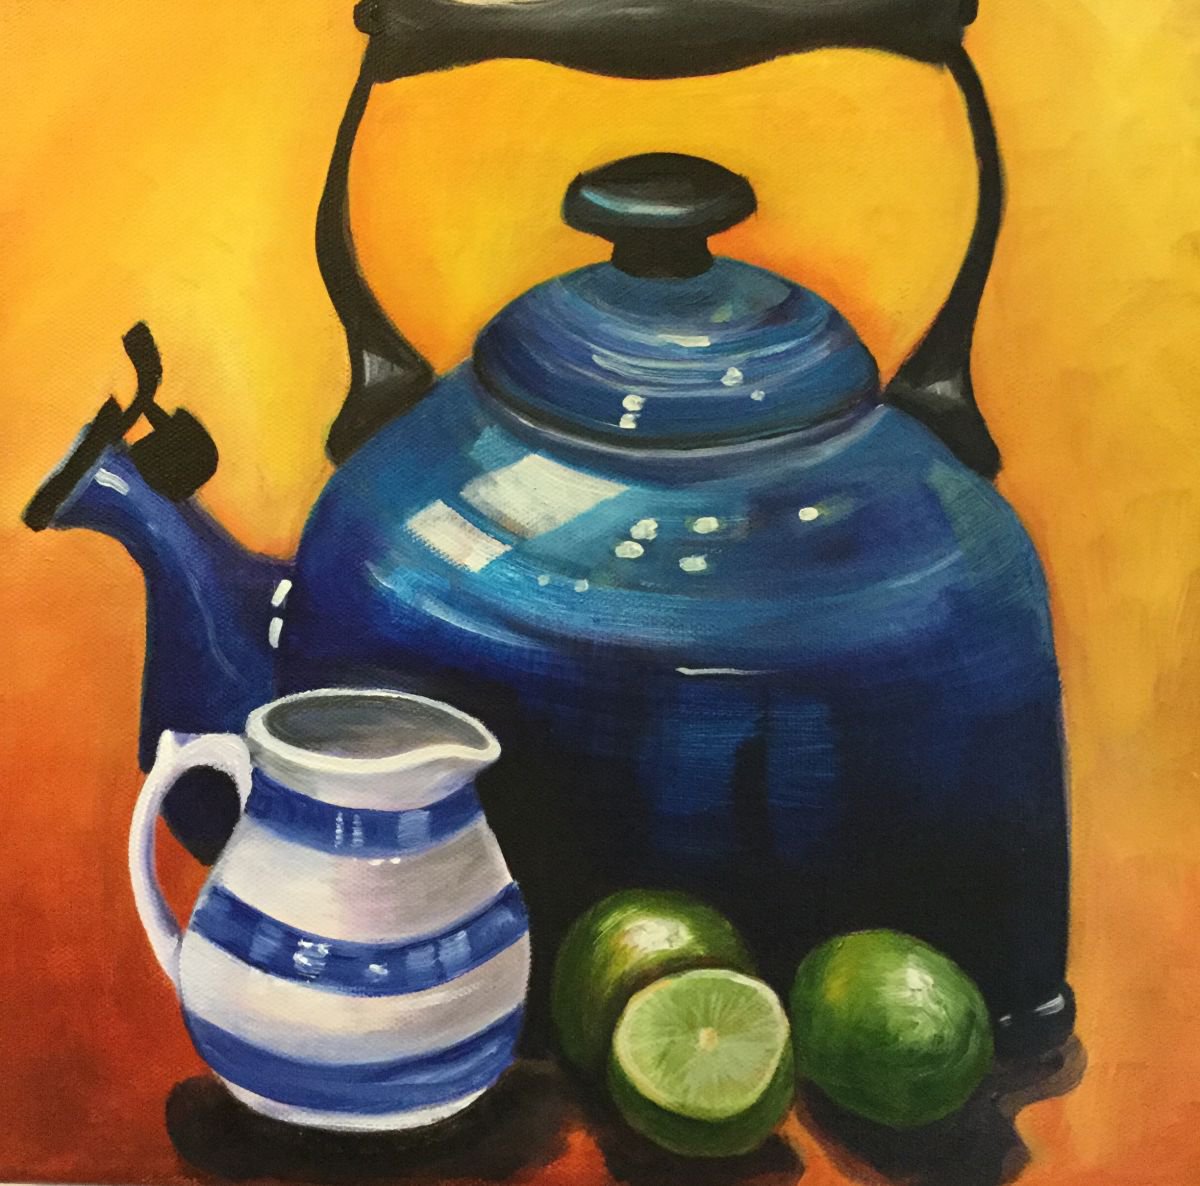 Le Creuset and limes by Carole Ann Hall